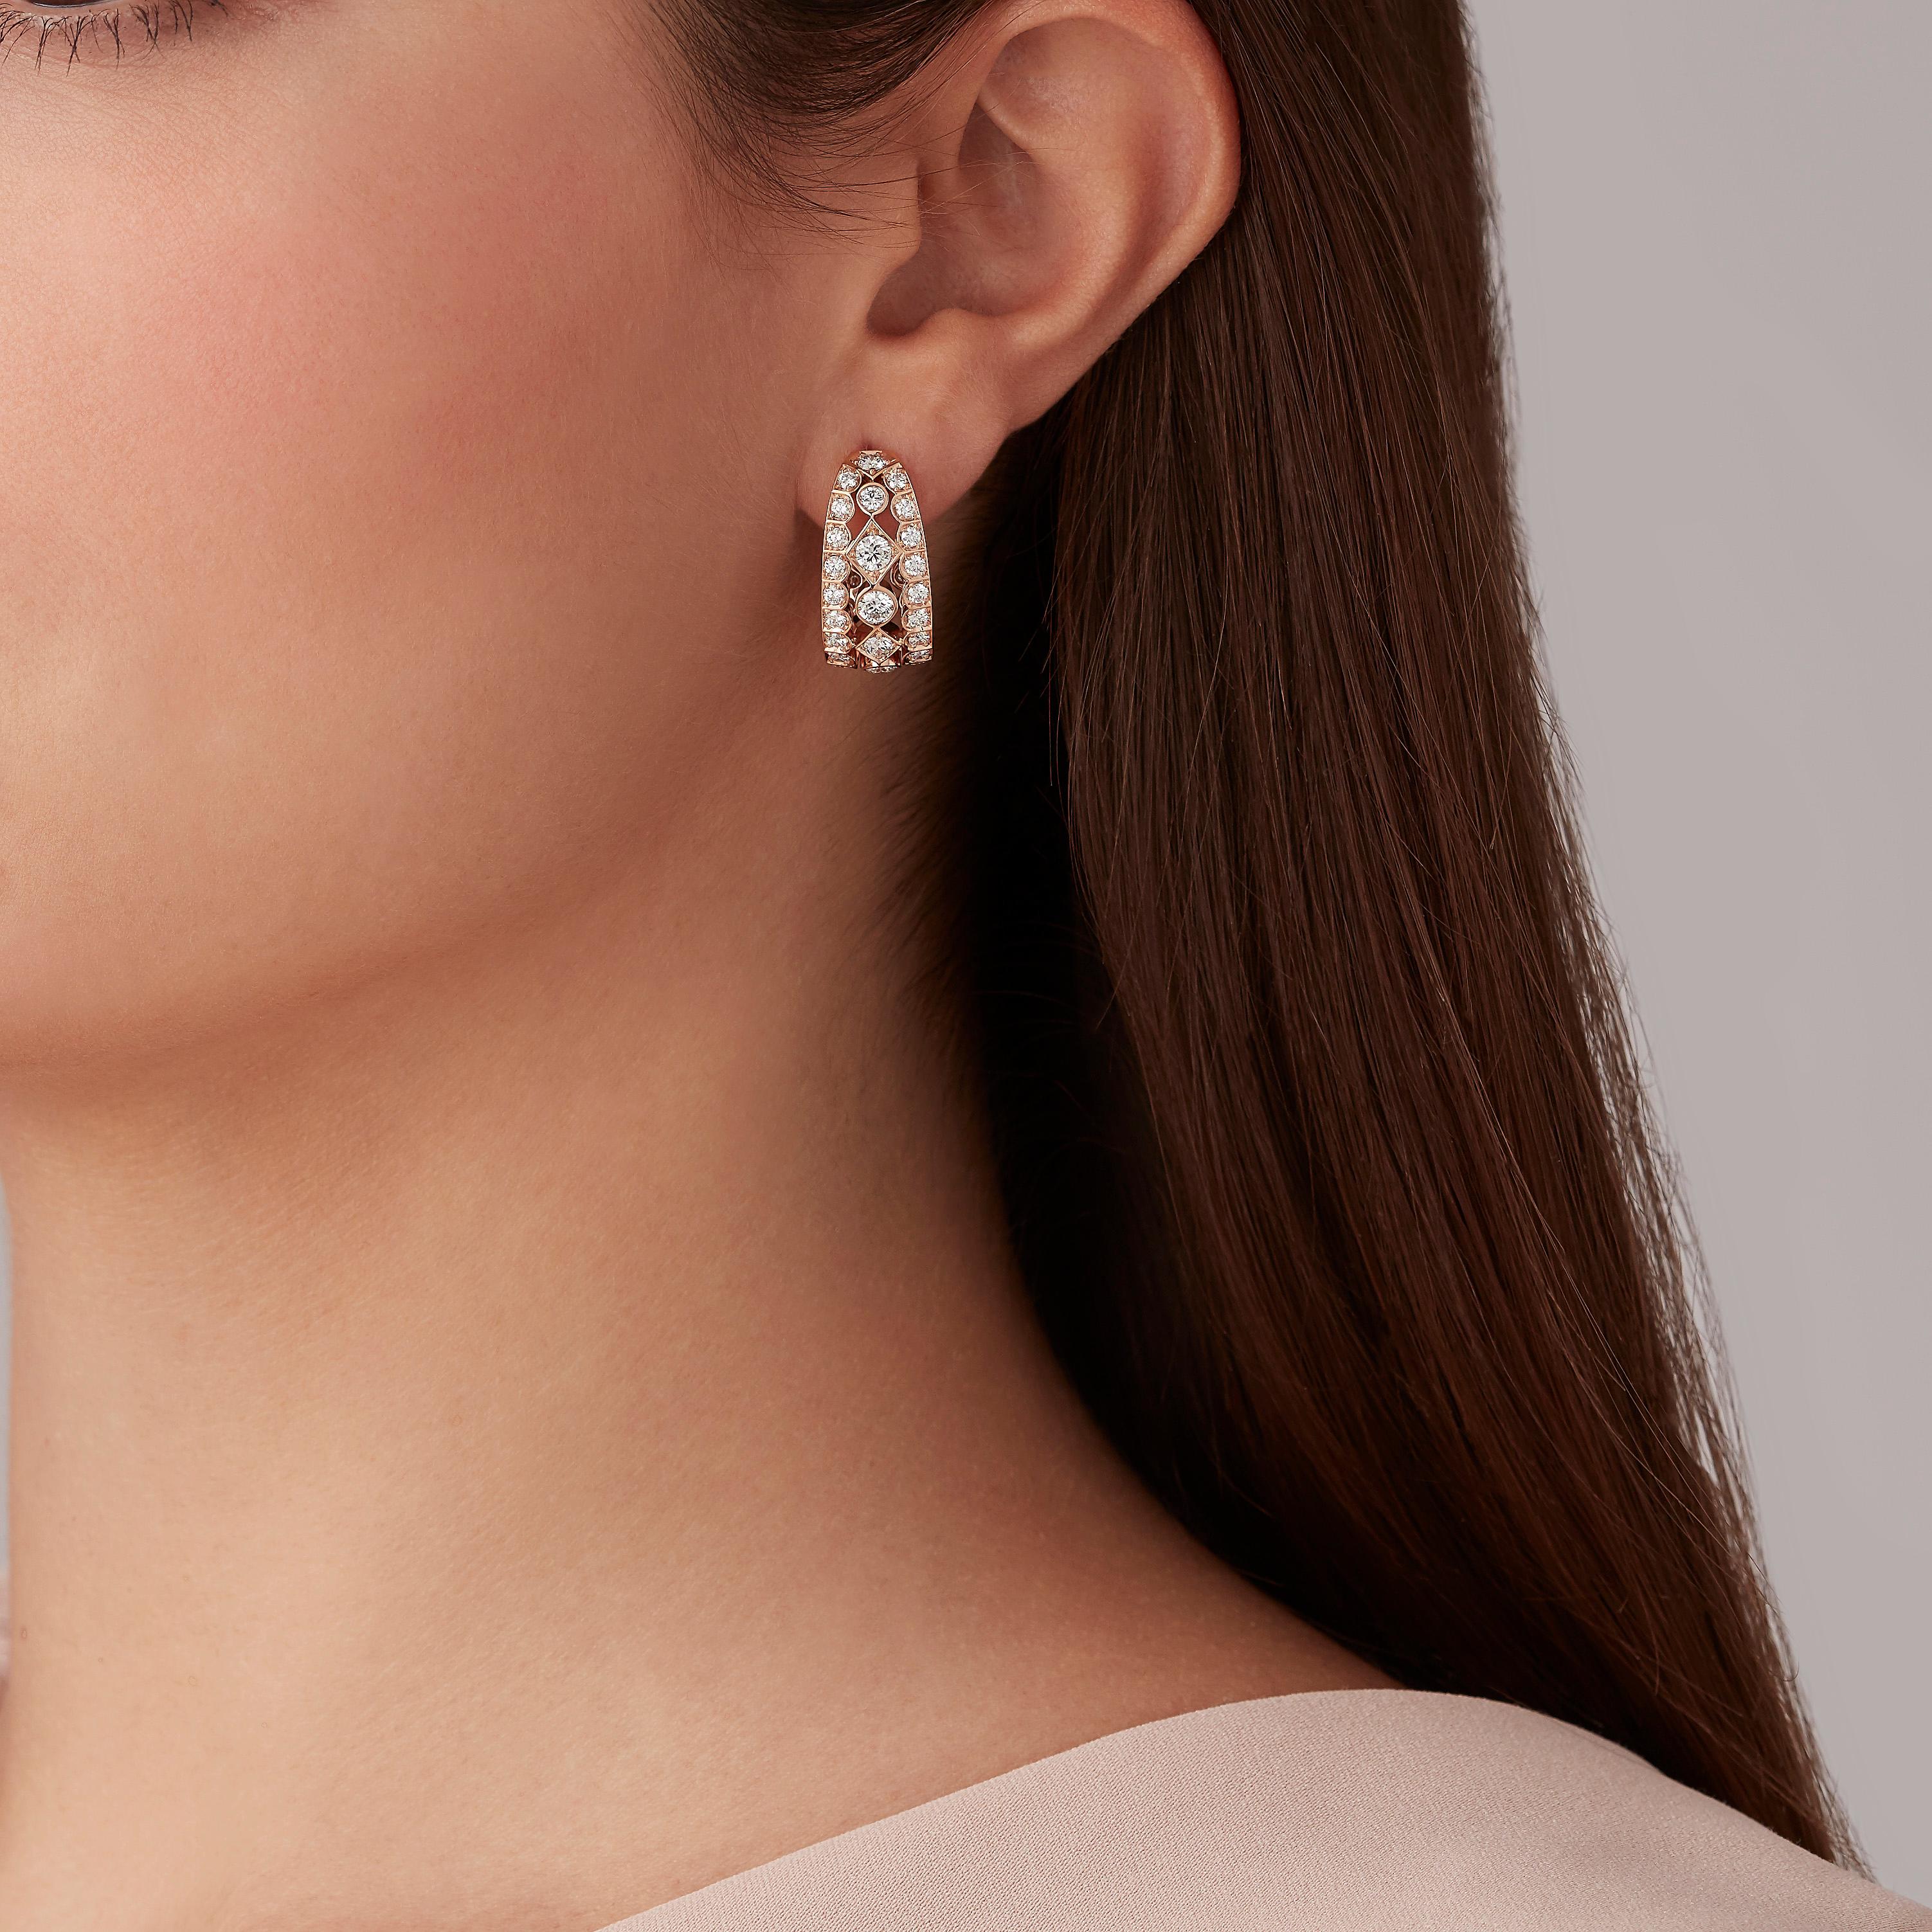 A House of Garrard pair of 18 karat rose gold earrings from the 'Albemarle' collection, set with round white diamonds in the iconic 'diamonds and dots' motif. 

70 round white diamonds weighing: 2.86cts

The House of Garrard is the longest serving